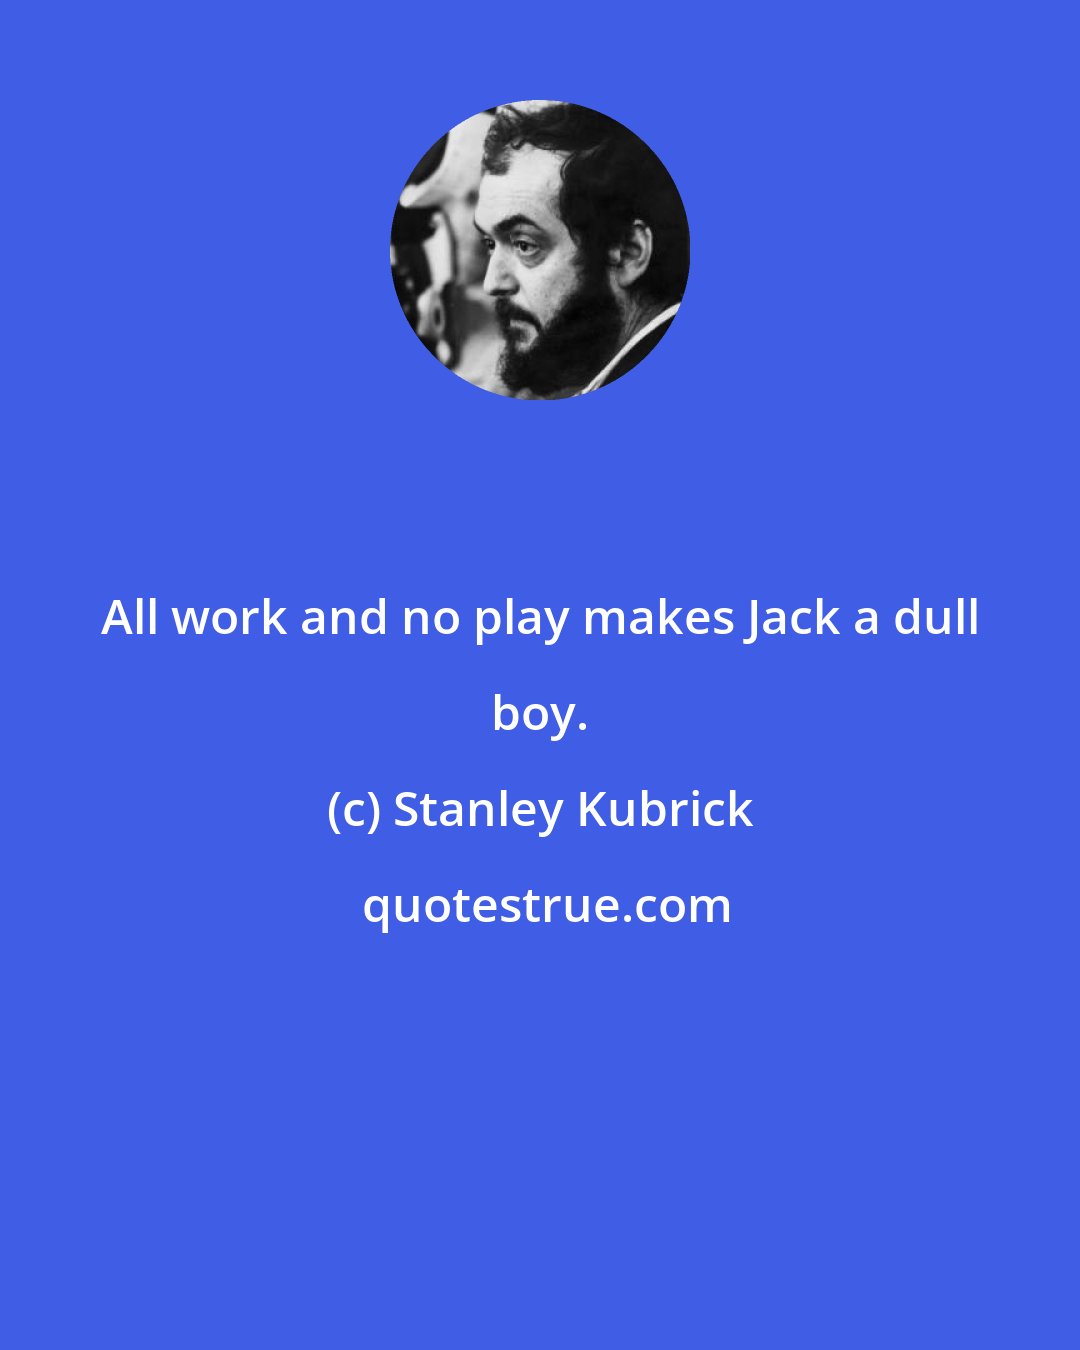 Stanley Kubrick: All work and no play makes Jack a dull boy.